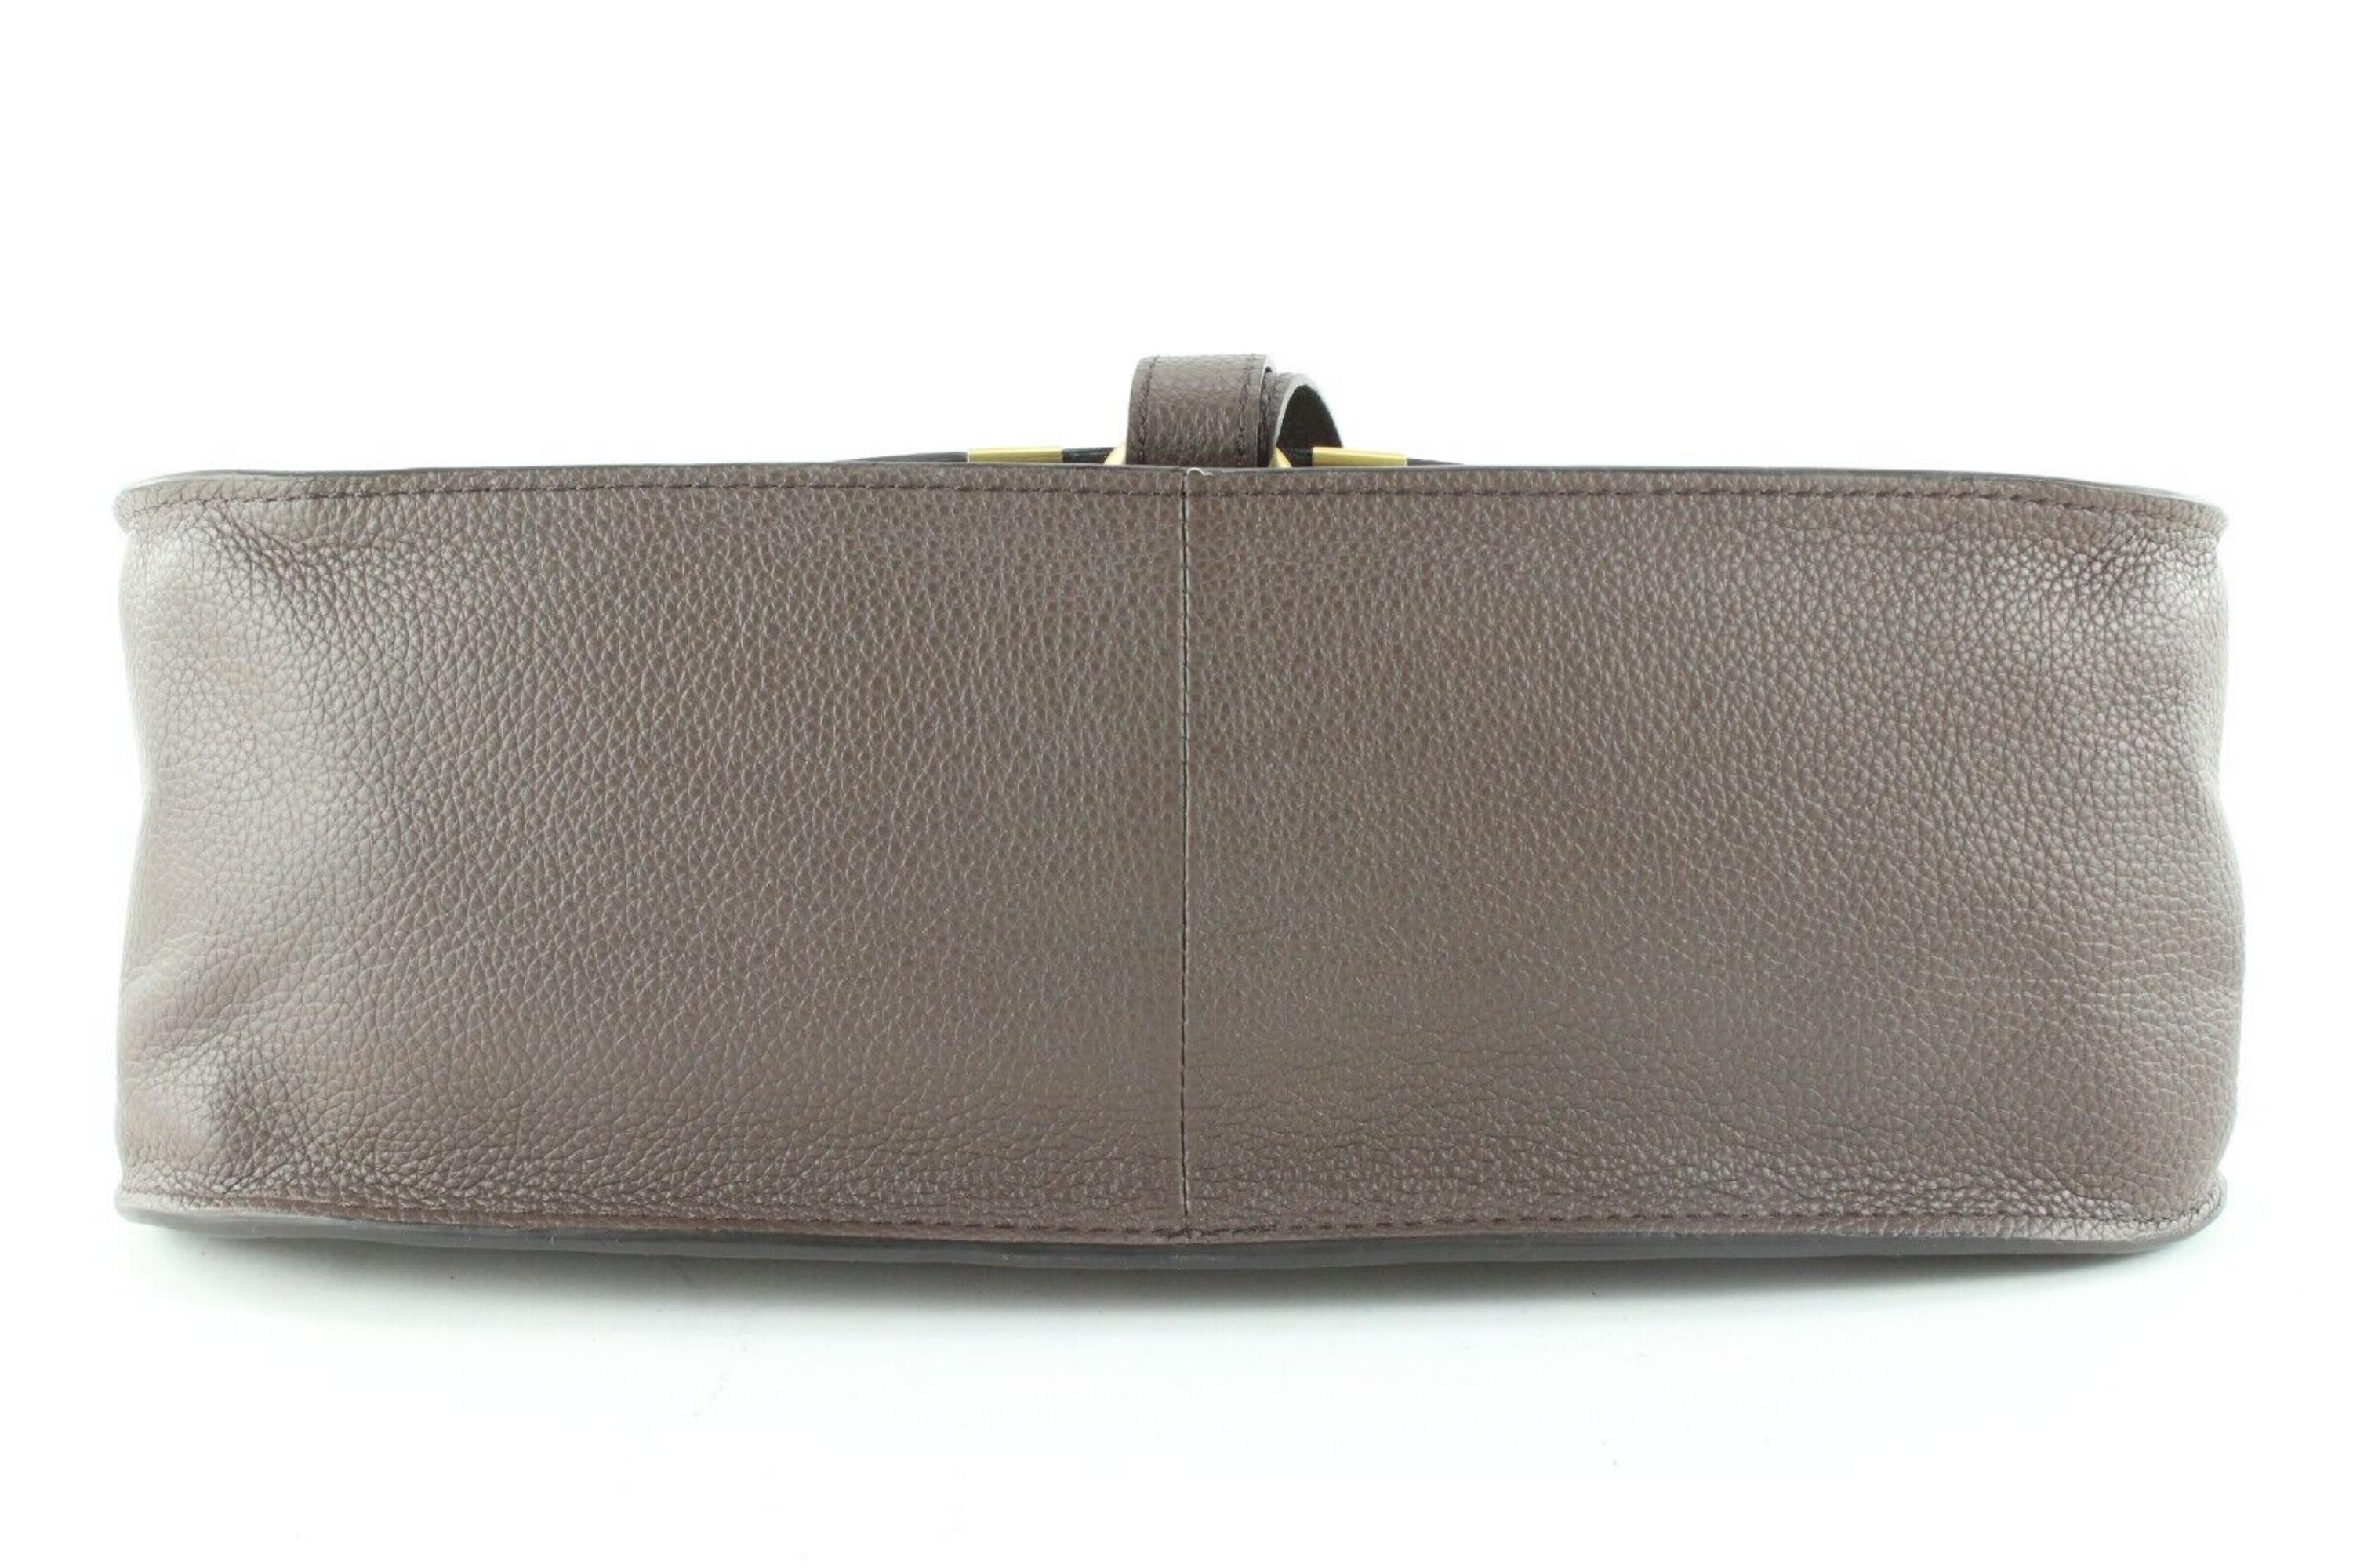 Chloe Grey Leather Medium Marcie 2way Flap Bag 1CH0509 In New Condition For Sale In Dix hills, NY